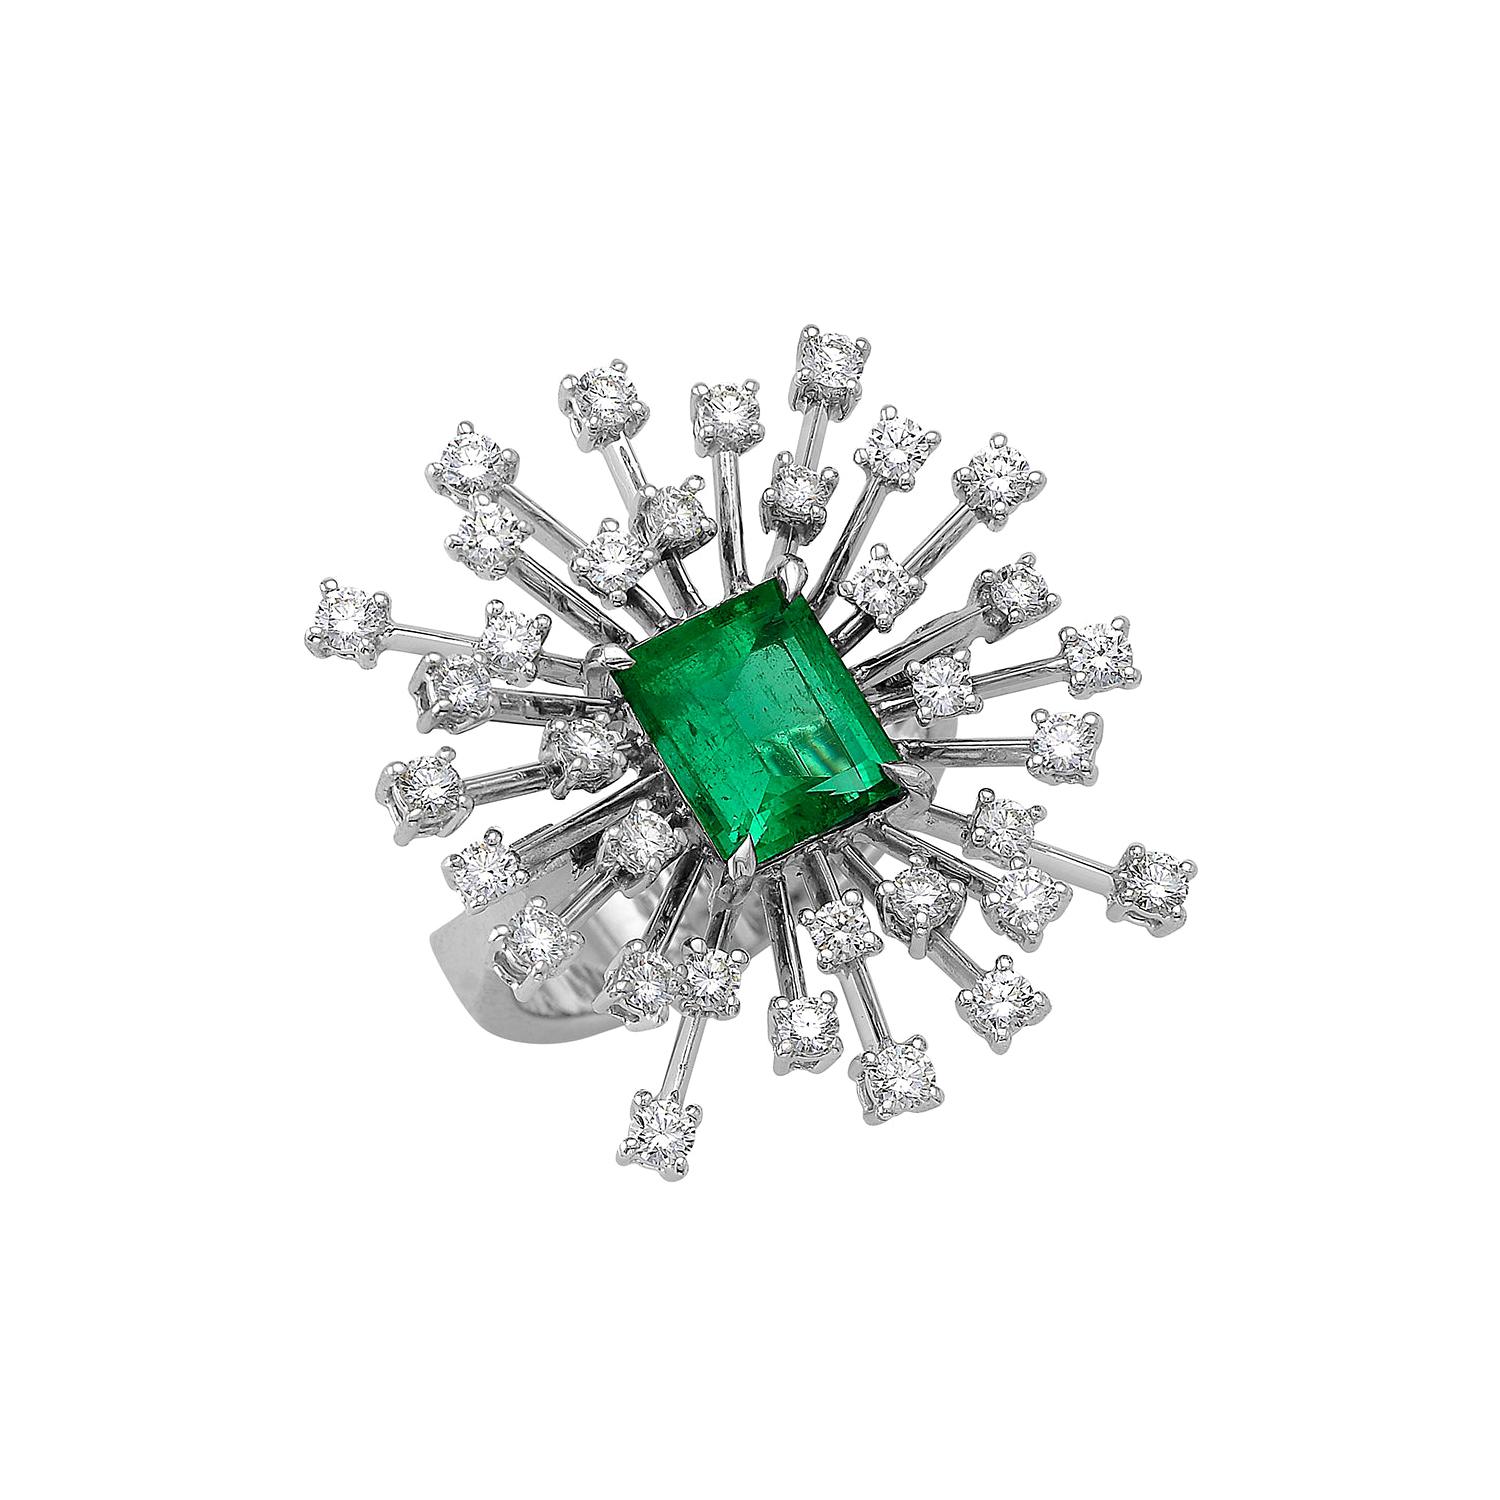 18 Karat White Gold Cocktail Ring with White Diamonds and Green Emerald For Sale